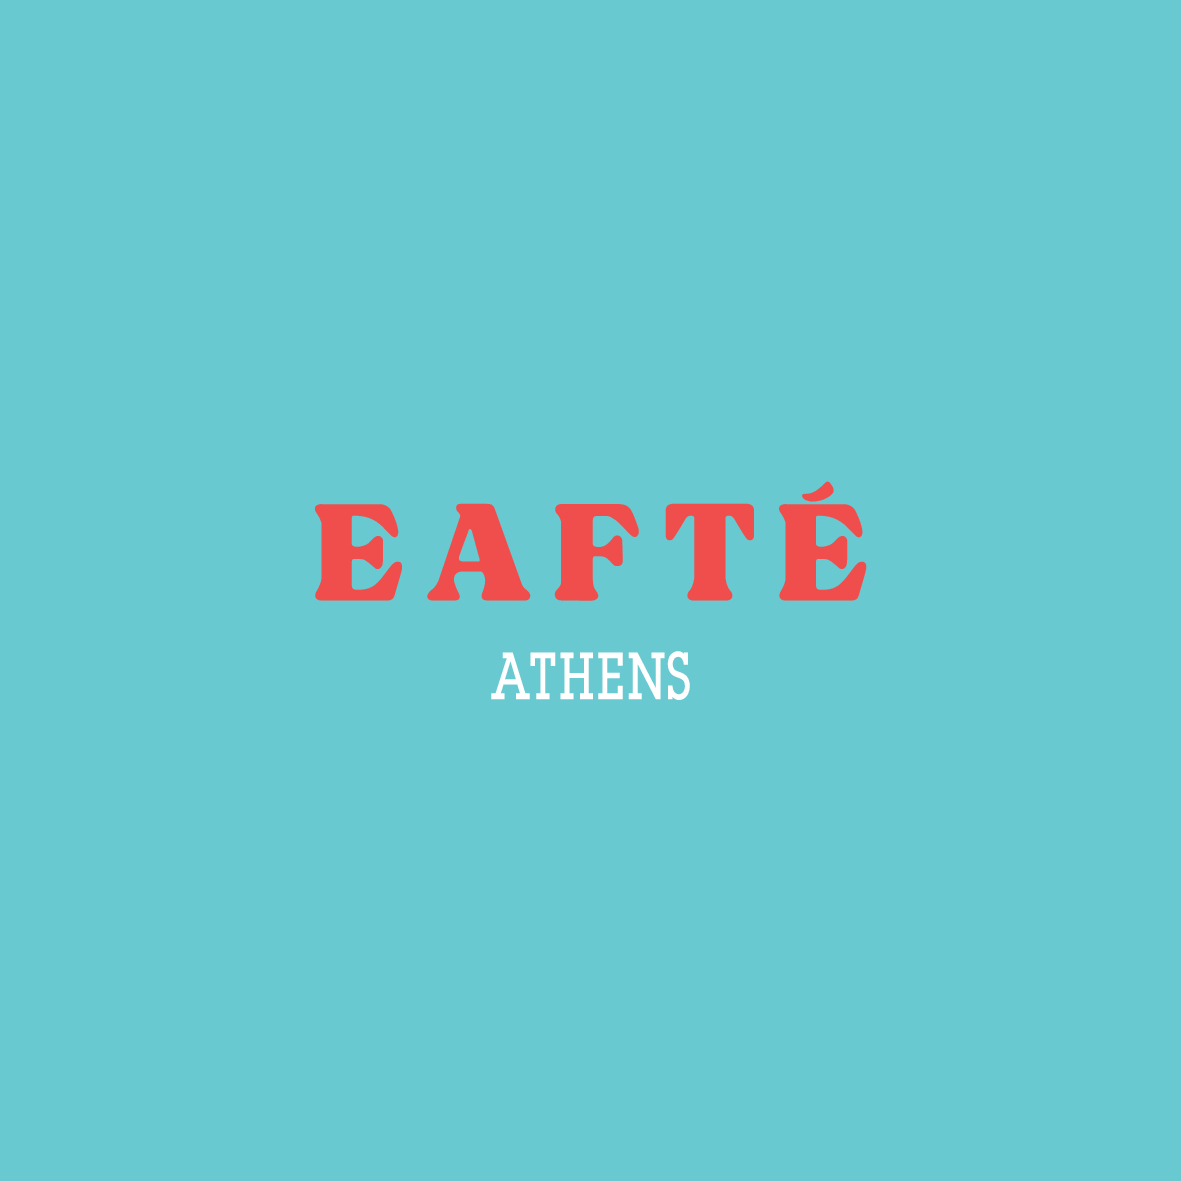 EAFTE